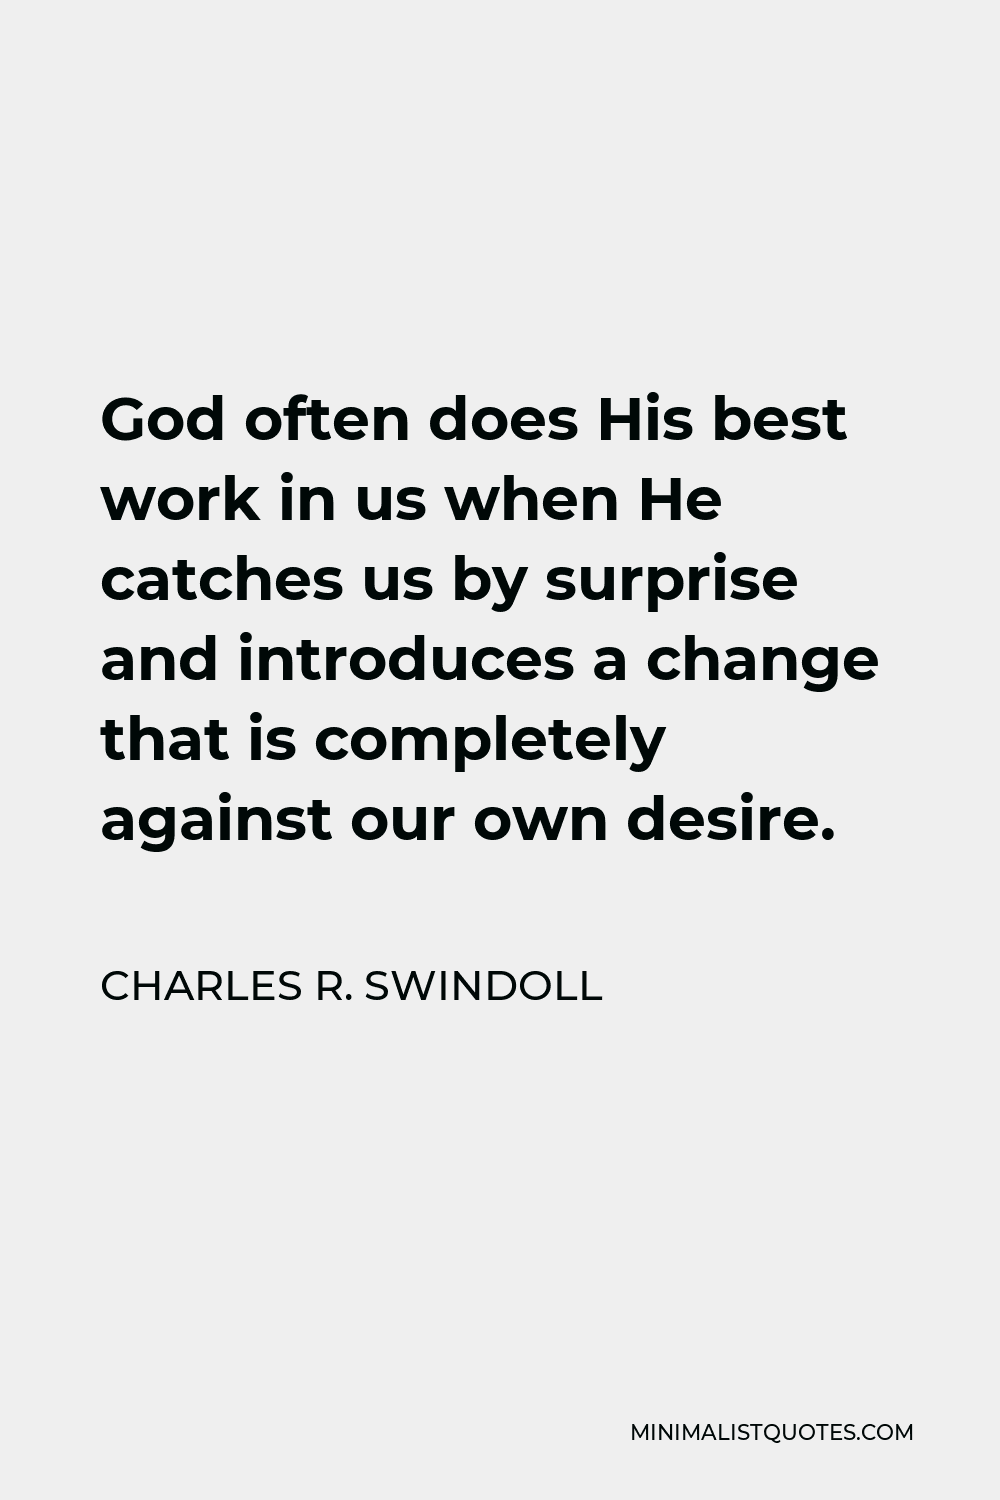 Charles R. Swindoll Quote - God often does His best work in us when He catches us by surprise and introduces a change that is completely against our own desire.